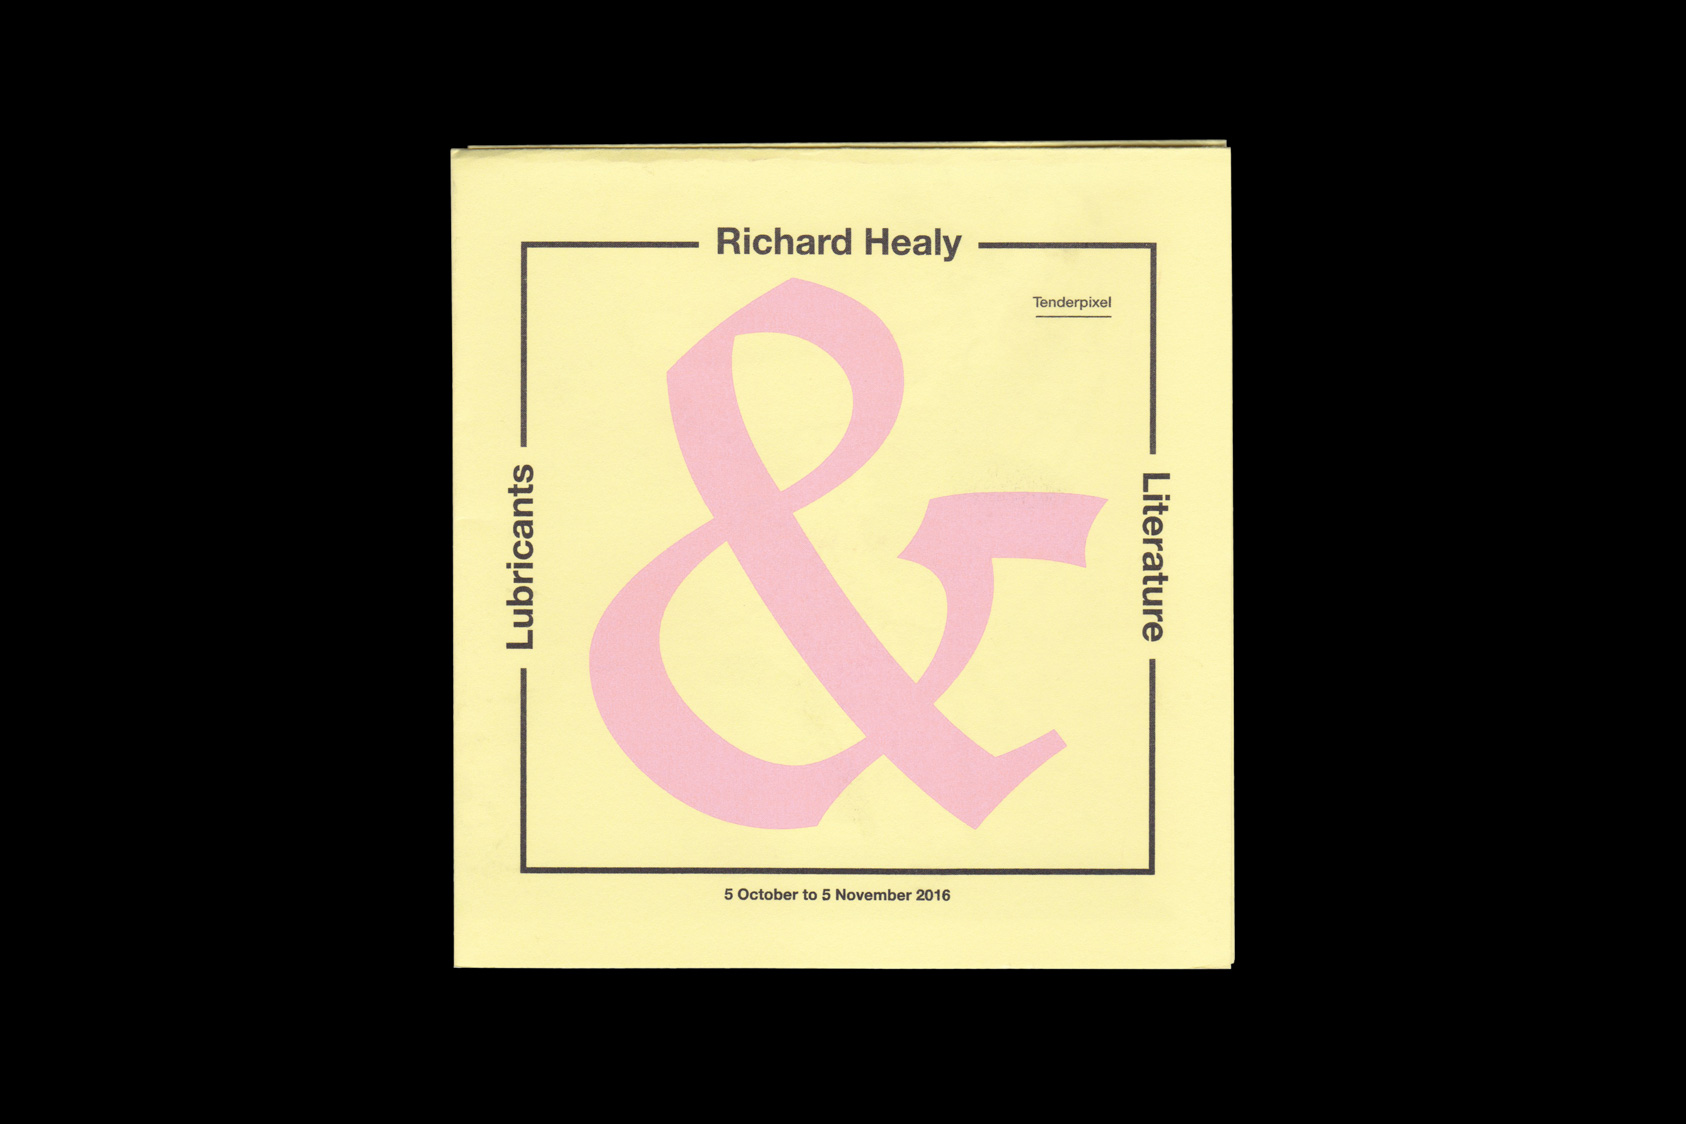 Lubricants and Literature - exhibition handout for Tenderpixel and Richard Healy, 2015 by the agency for emerging ideas